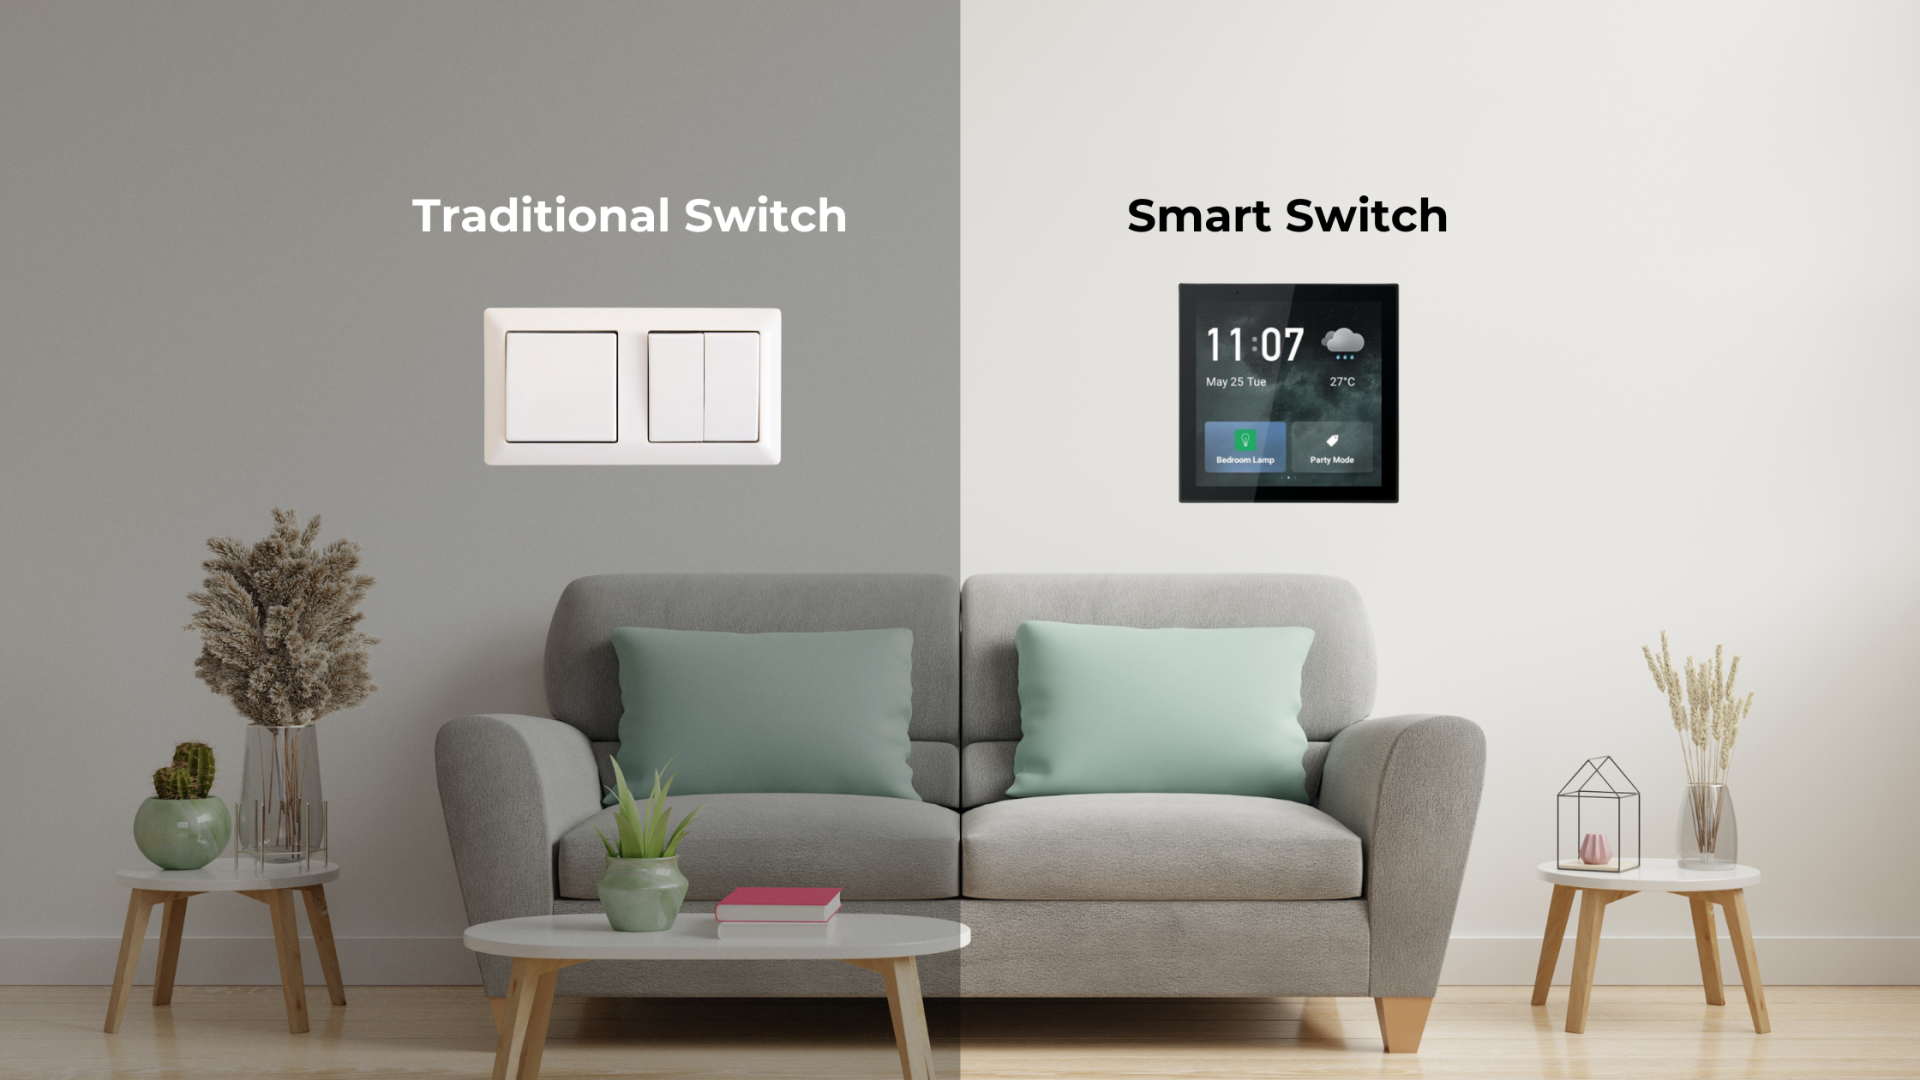 The Ultimate Showdown: Smart Switch vs Traditional Switch